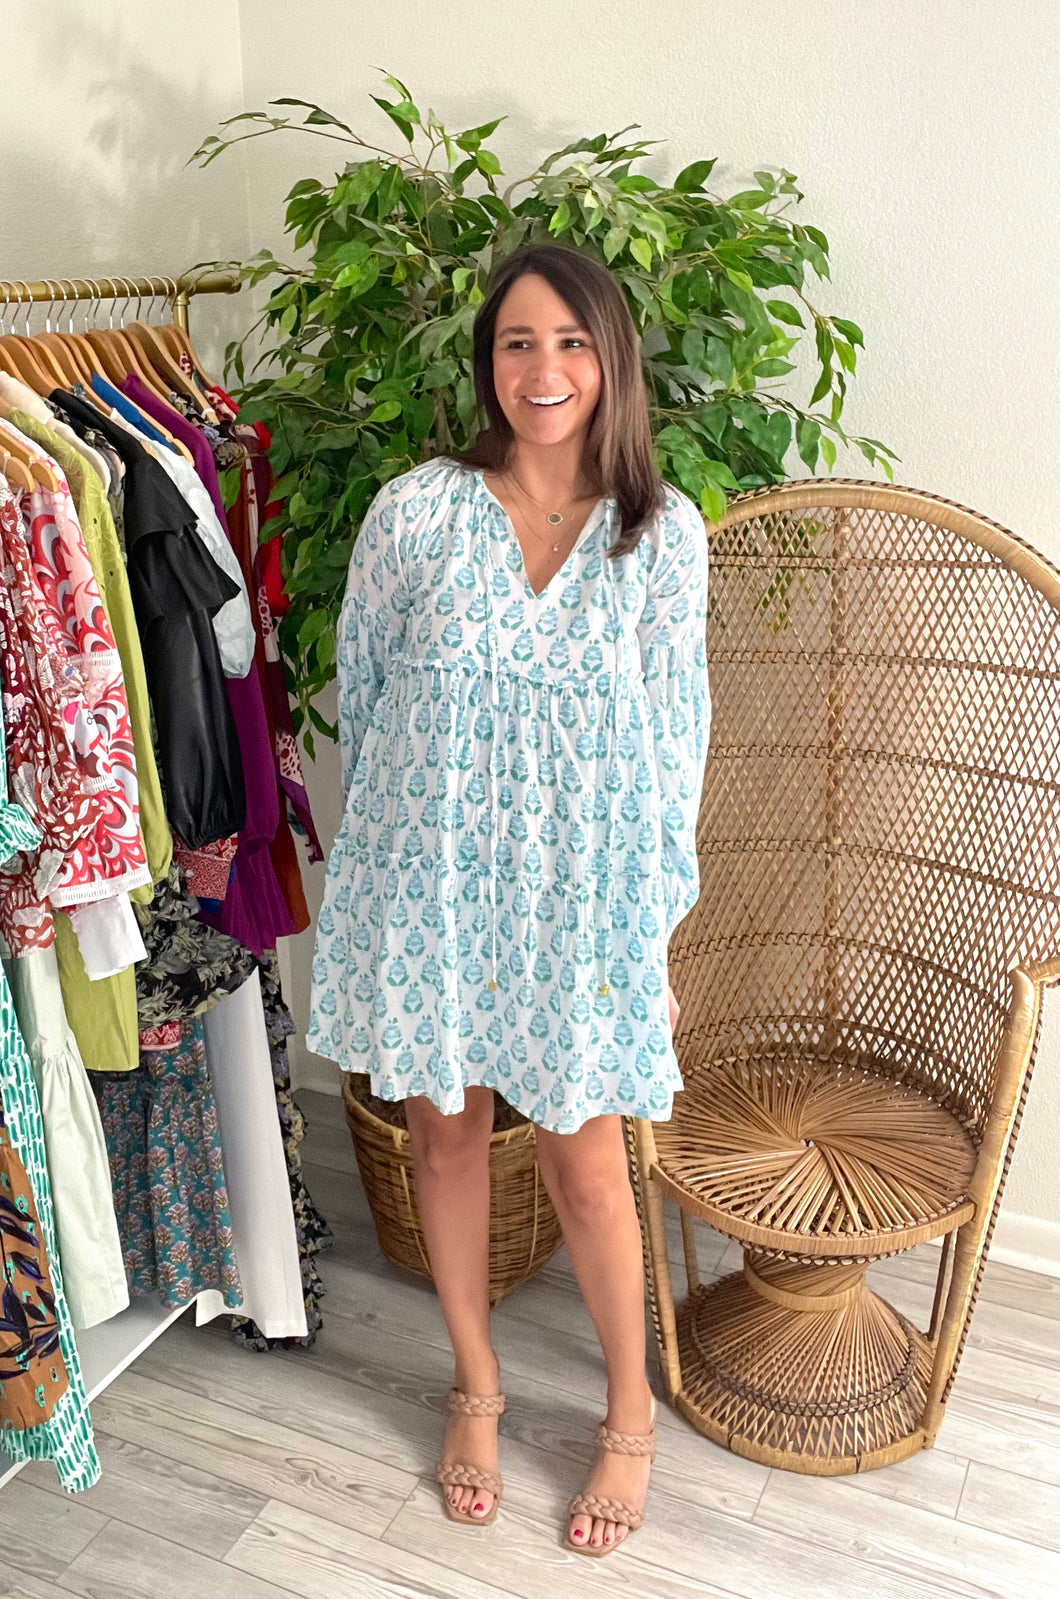 The Lily Mae long sleeve mini dress. Drop pleated sleeves, tiered dress throughout with ruffle detailing. Optional front tie closure. Light weight and lined.  True to size, wearing size x-small. 5'5 height, size up for length if needed.